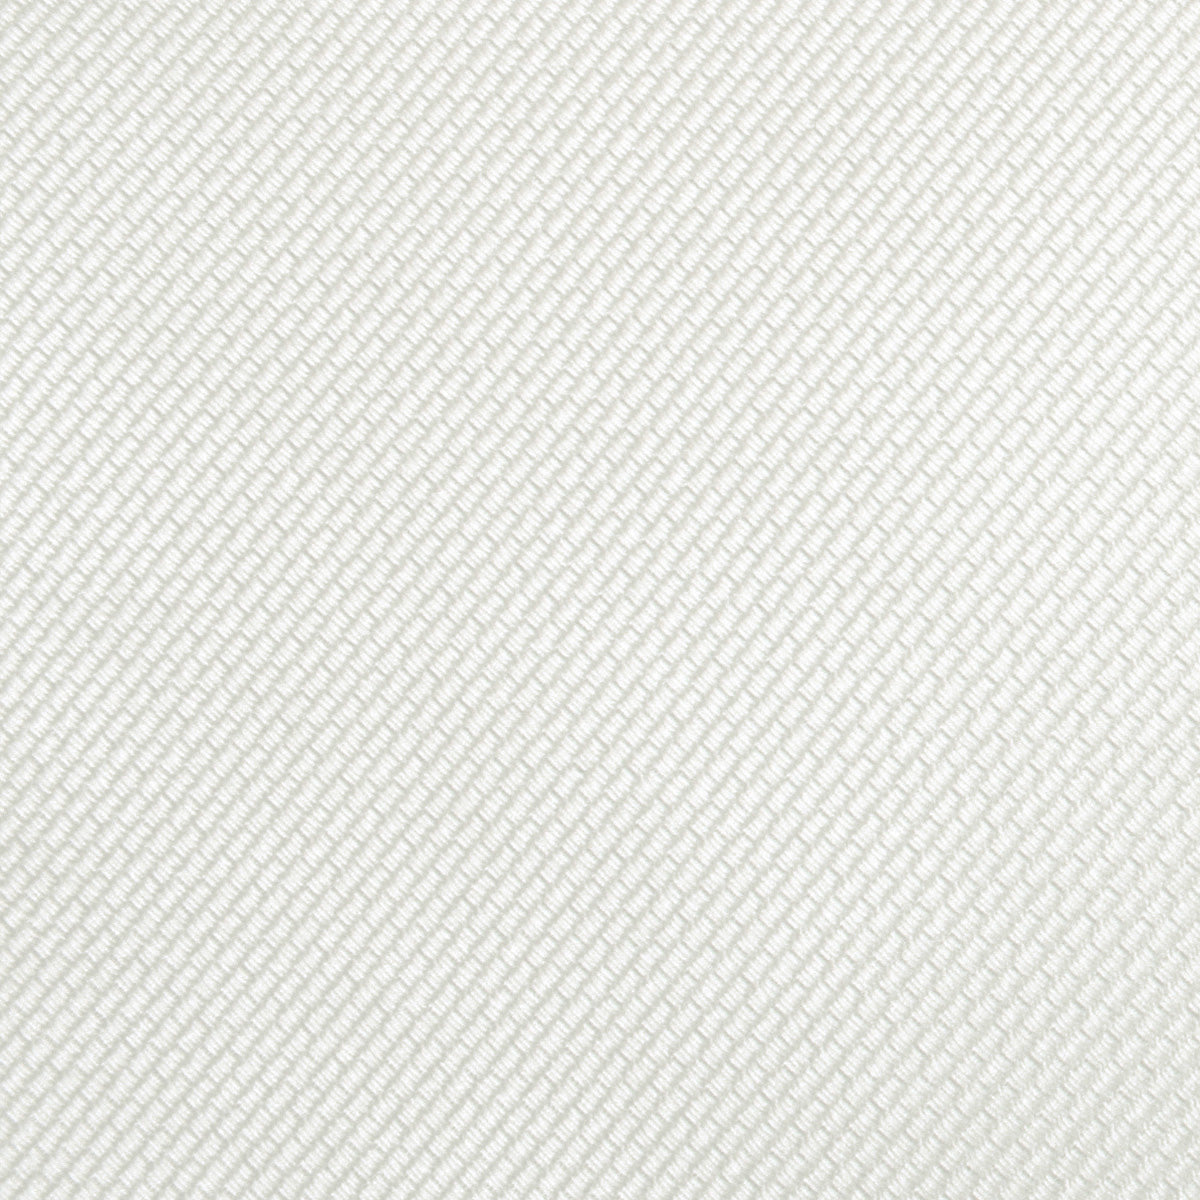 Ivory Weave Fabric Swatch